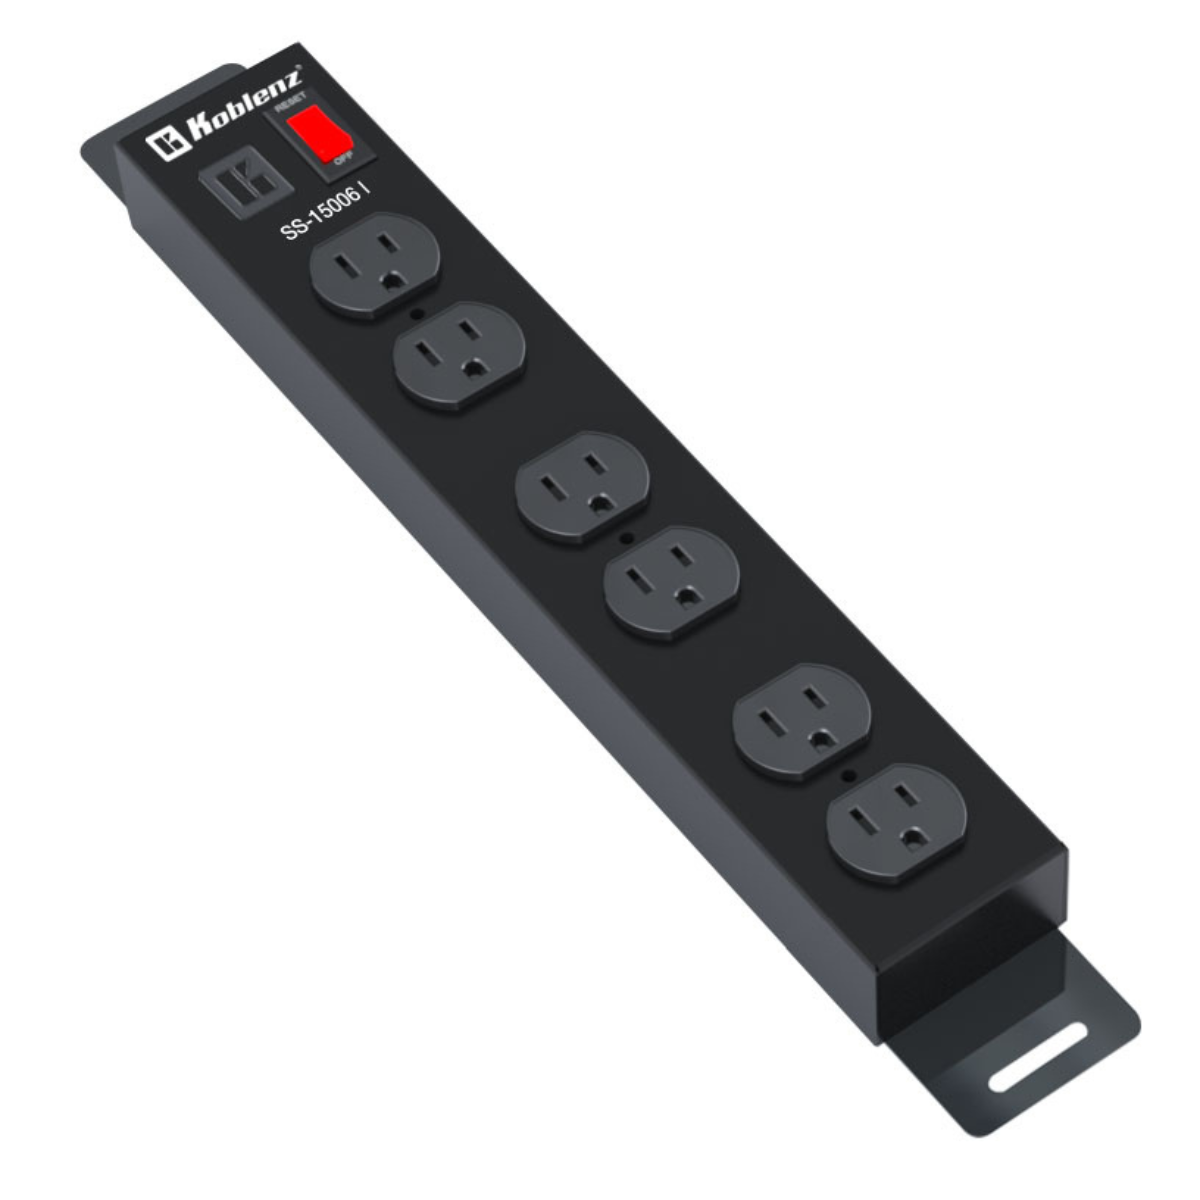 Heavy Duty 6 Outlet Power Strip SS-15006 I